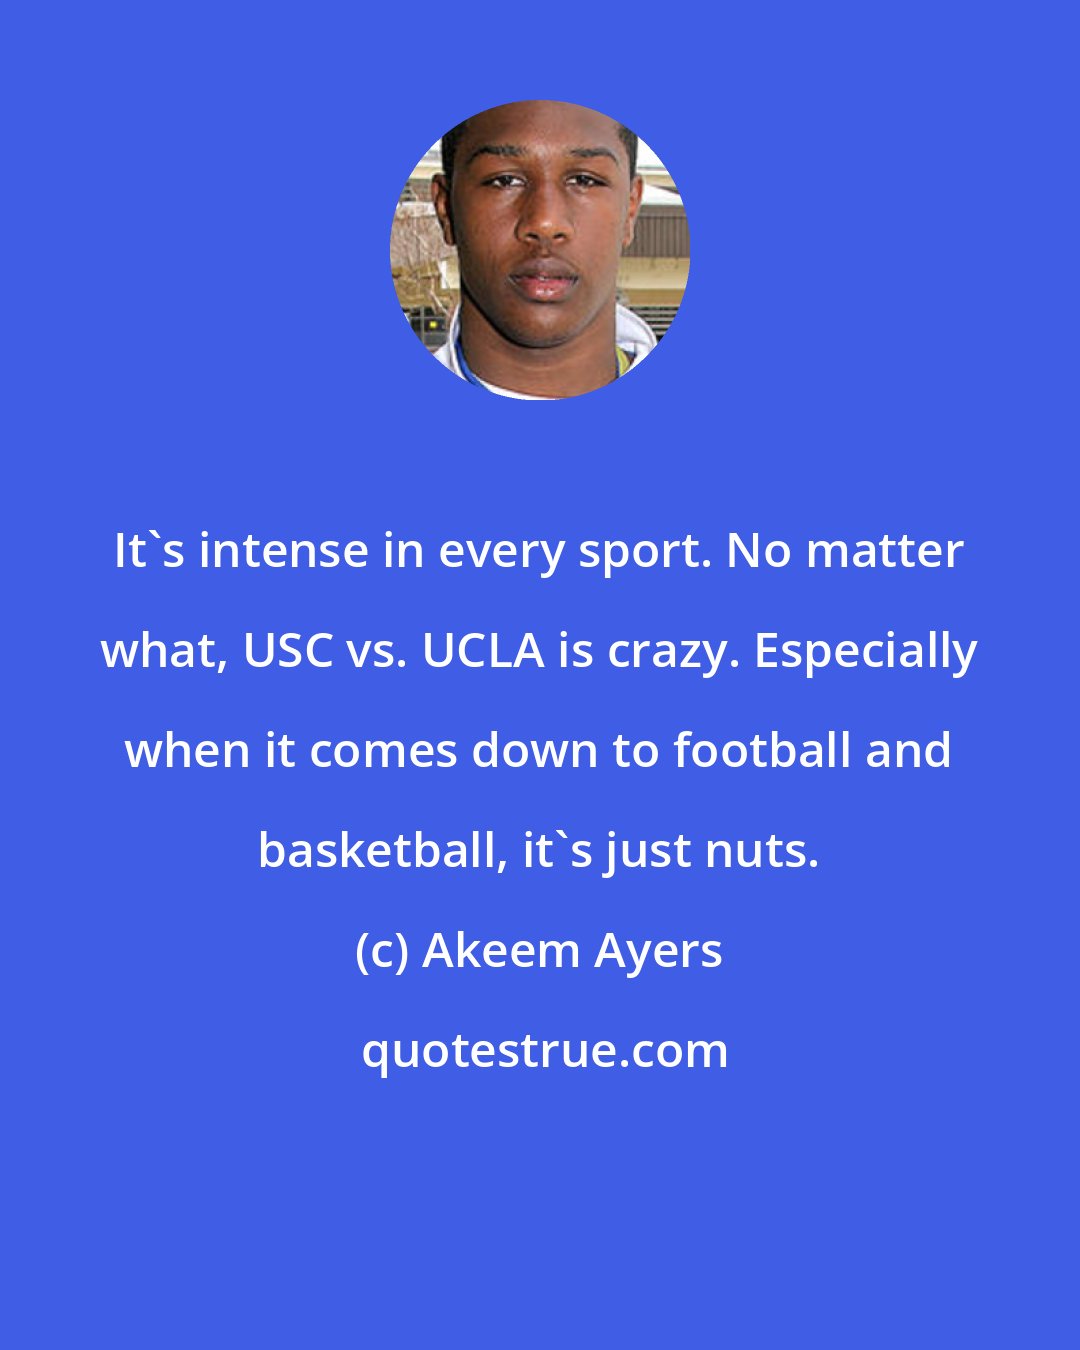 Akeem Ayers: It's intense in every sport. No matter what, USC vs. UCLA is crazy. Especially when it comes down to football and basketball, it's just nuts.